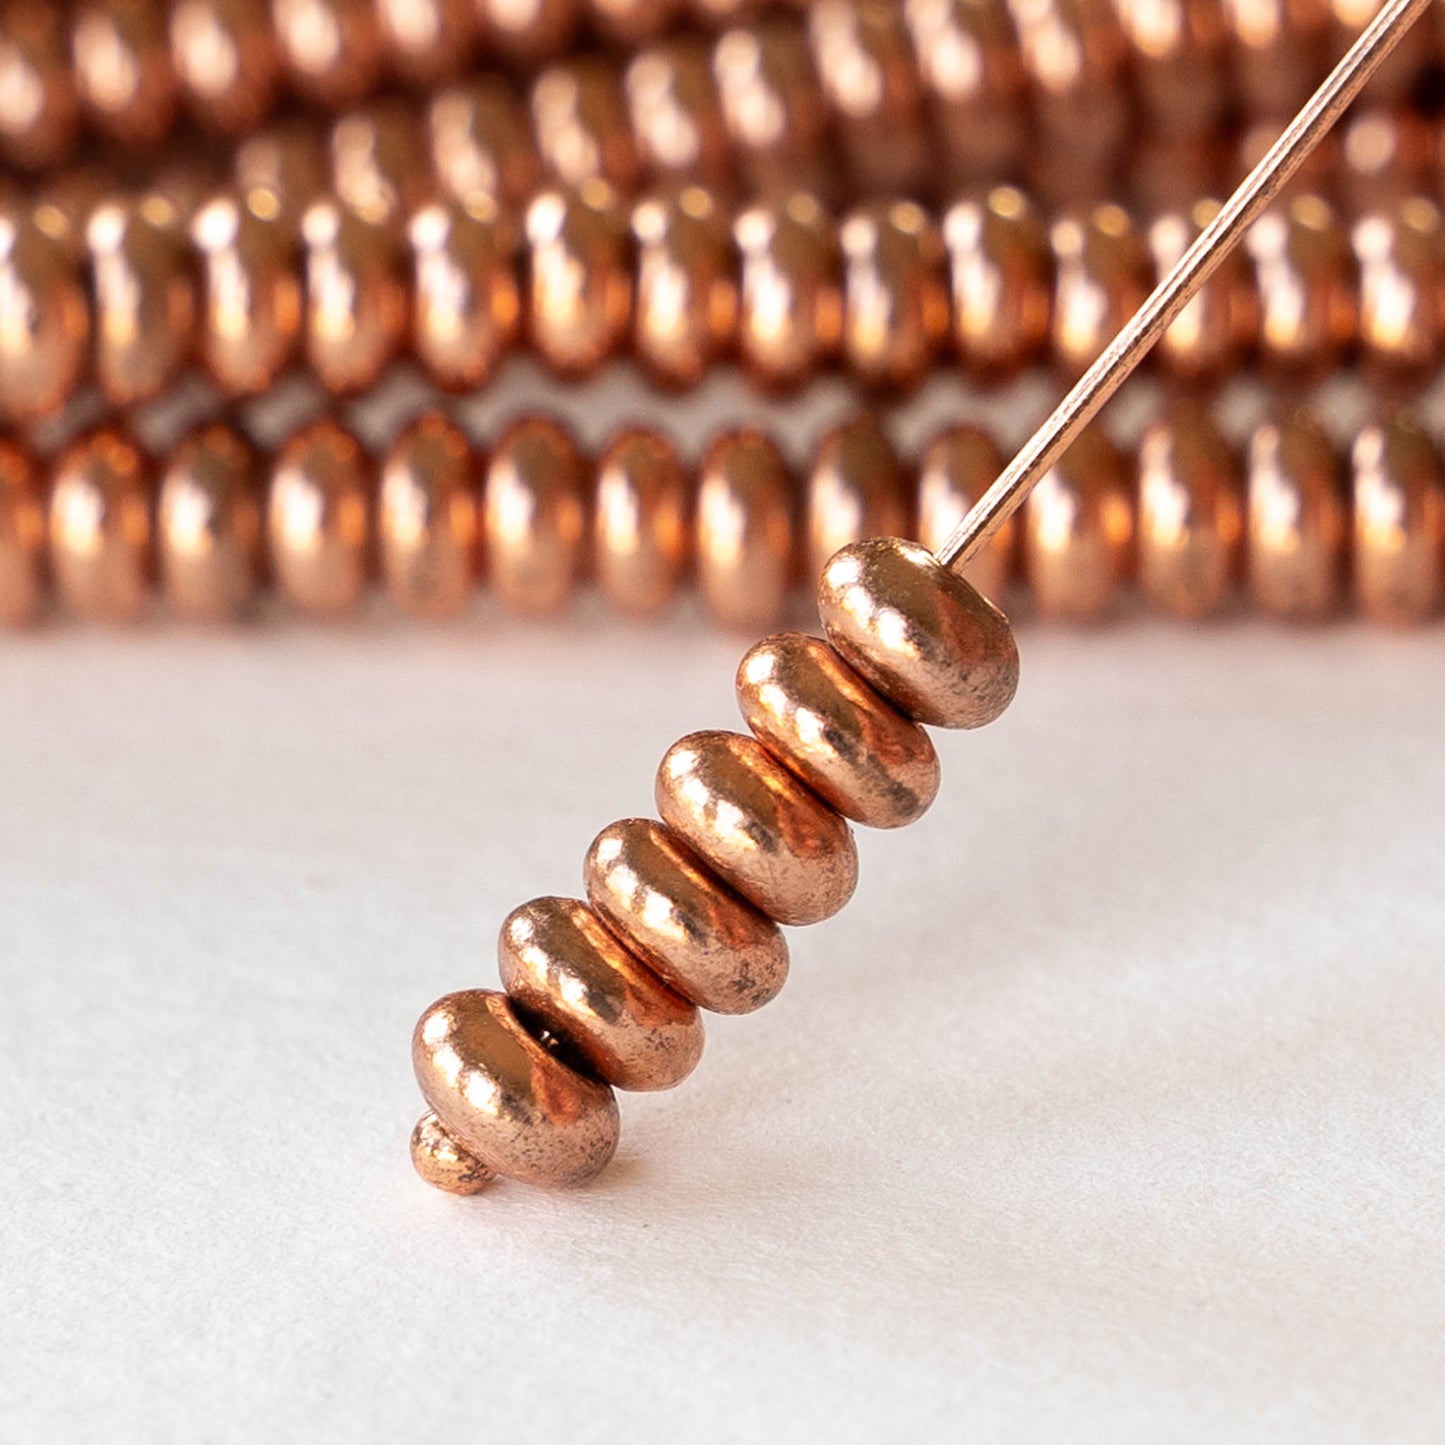 5mm Copper Rondelle Beads - 40